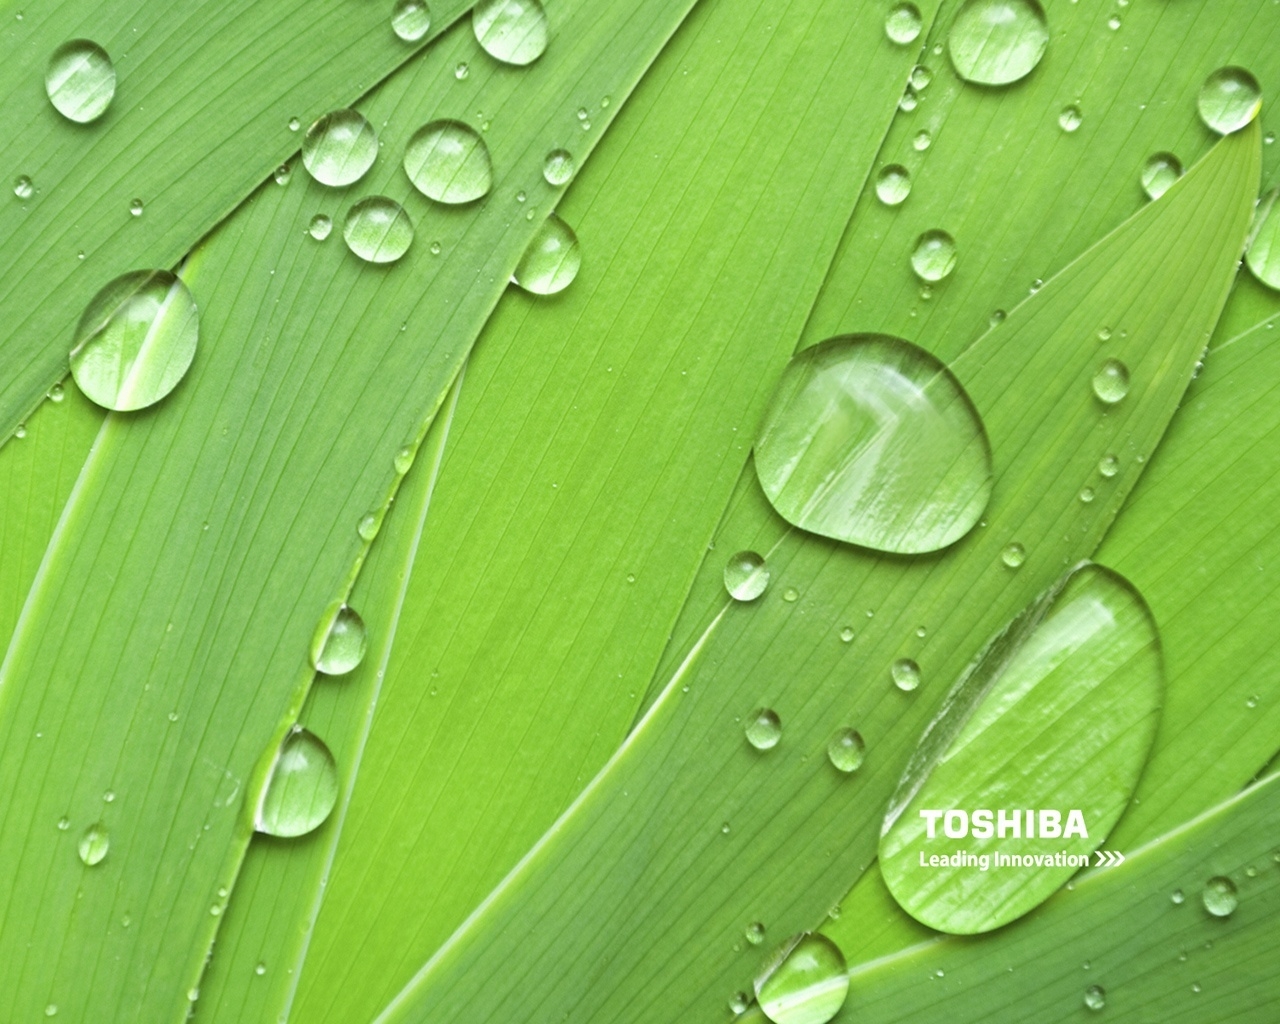 Toshiba natural green for 1280 x 1024 resolution